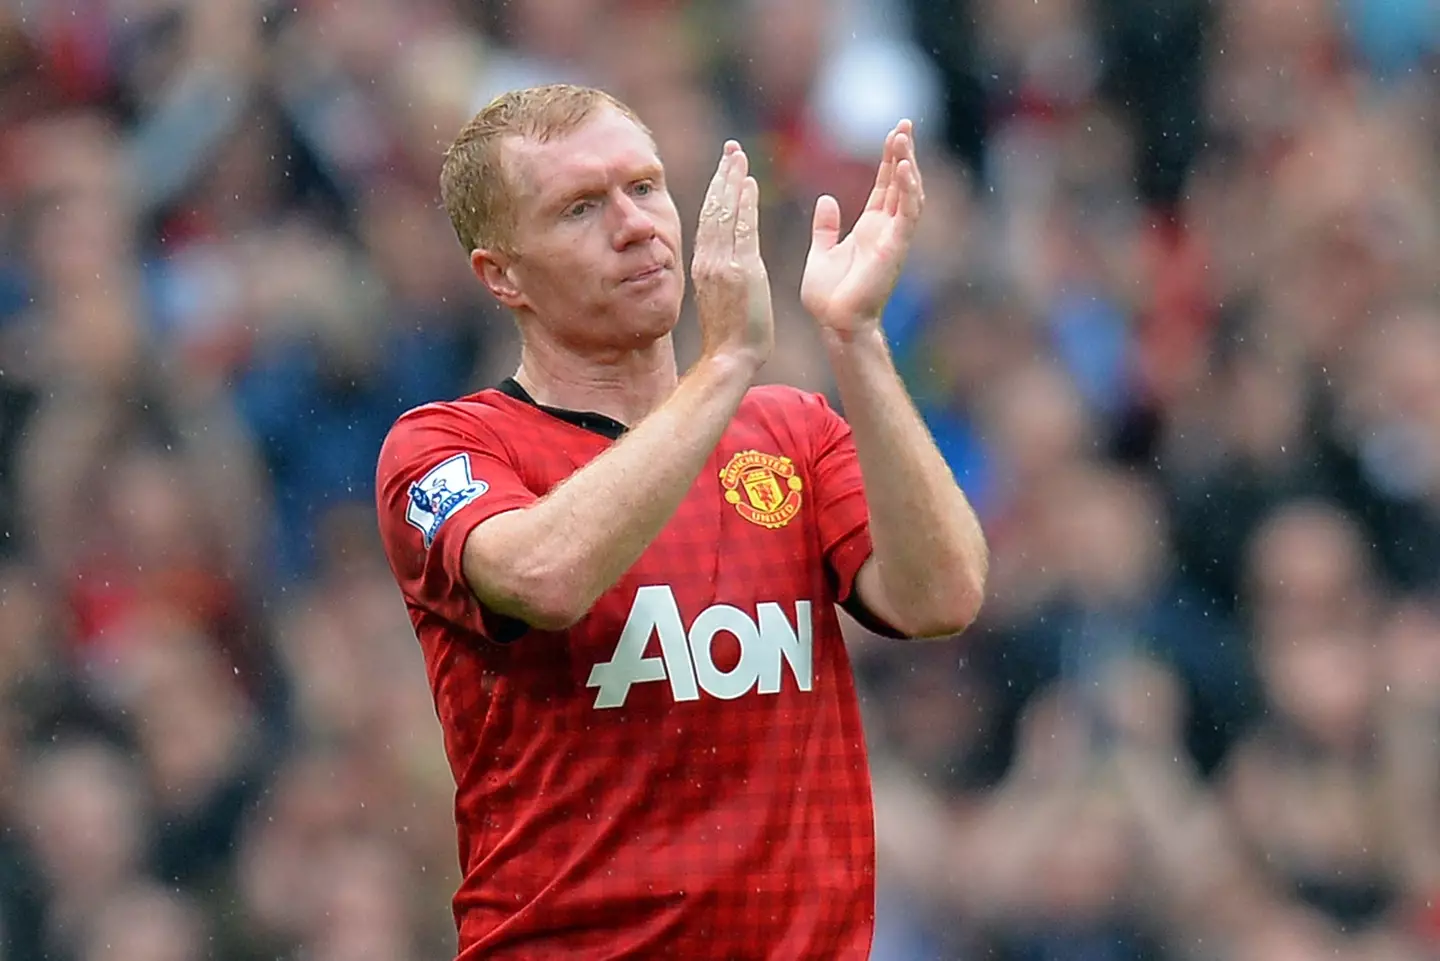 Scholes is a United legend. (Image: Getty)